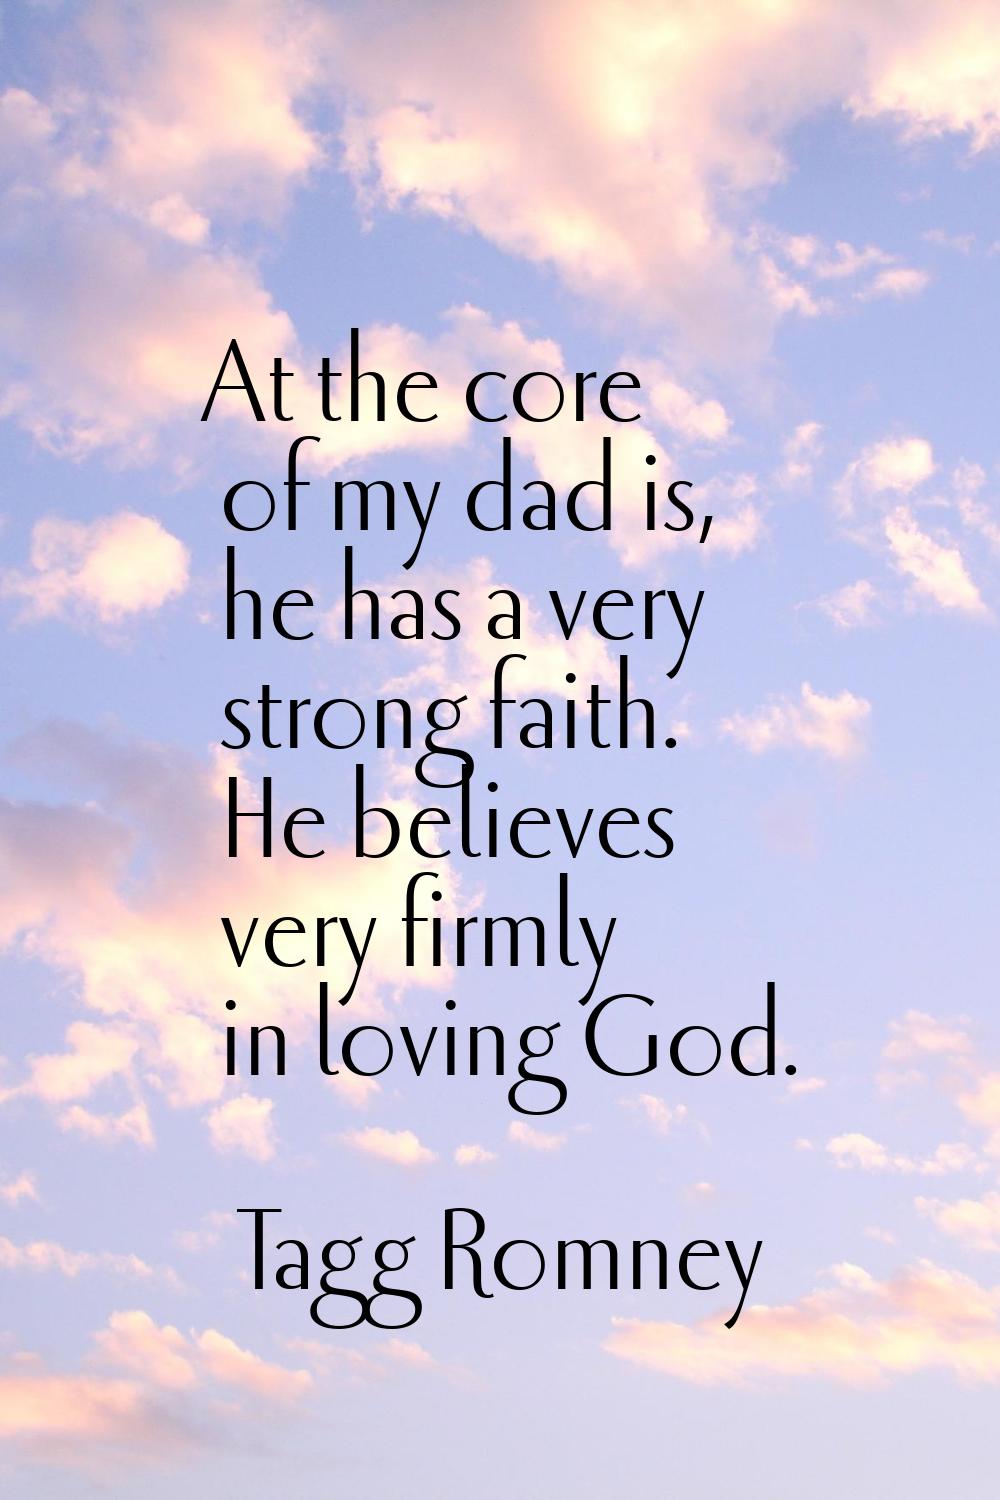 At the core of my dad is, he has a very strong faith. He believes very firmly in loving God.